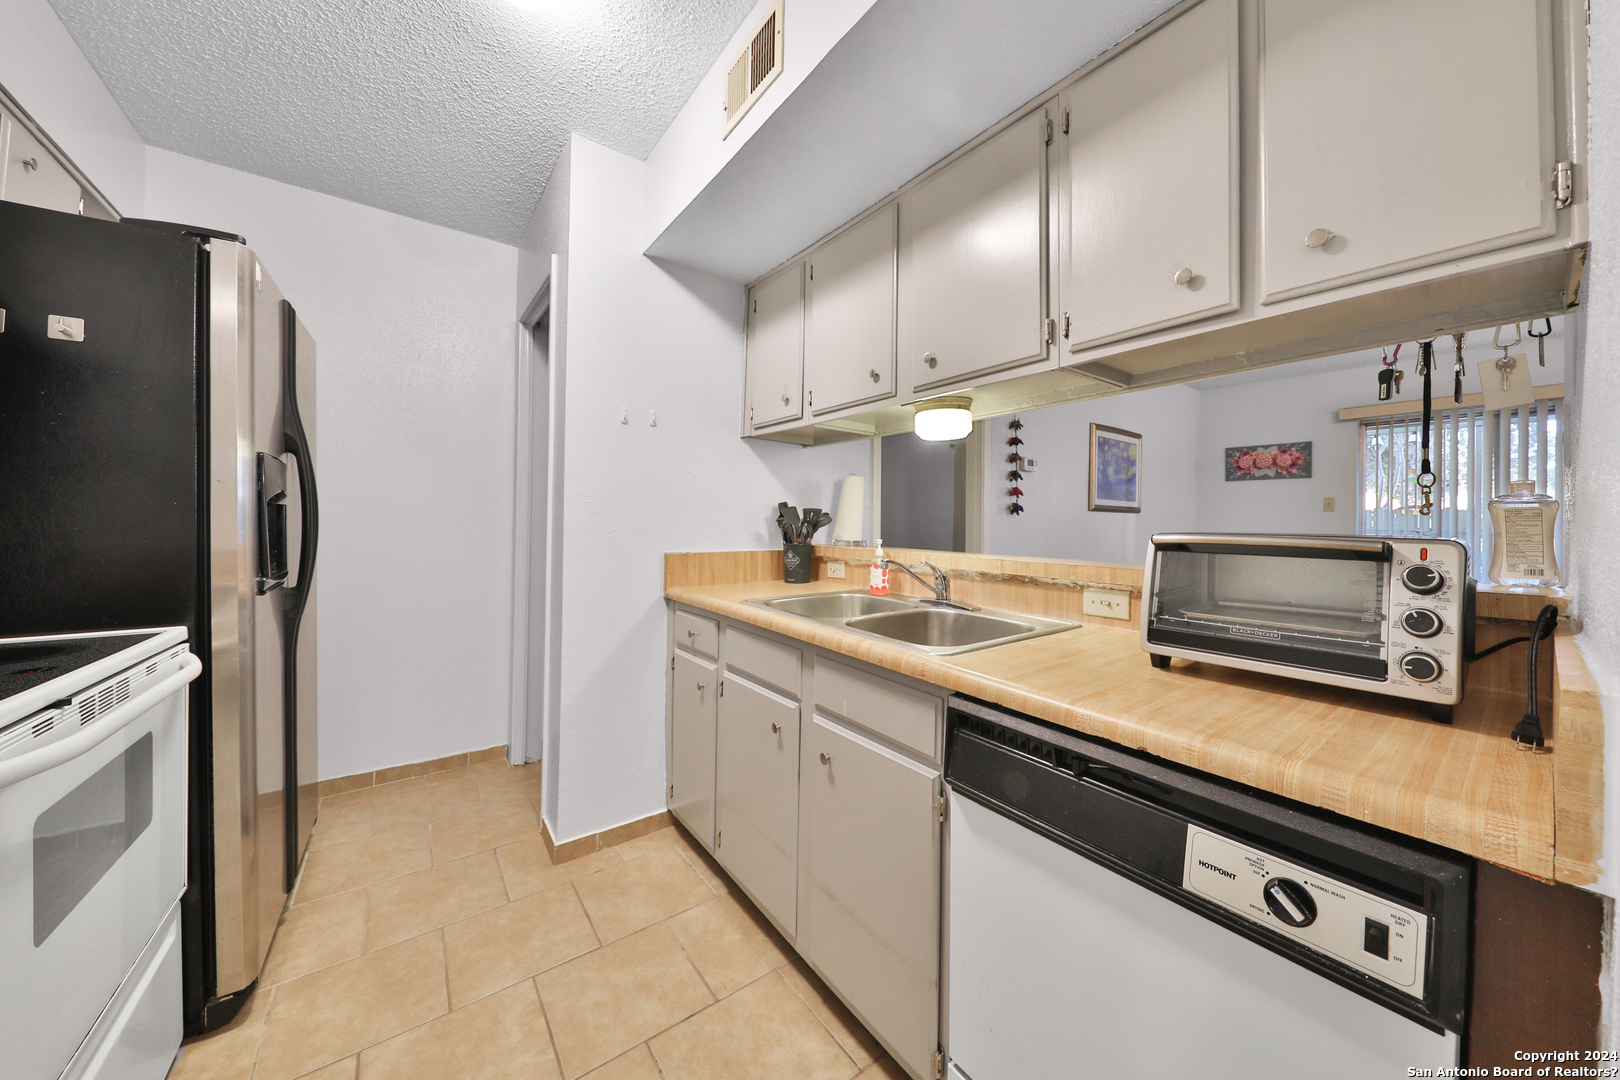 a kitchen with stainless steel appliances a stove a microwave and a refrigerator